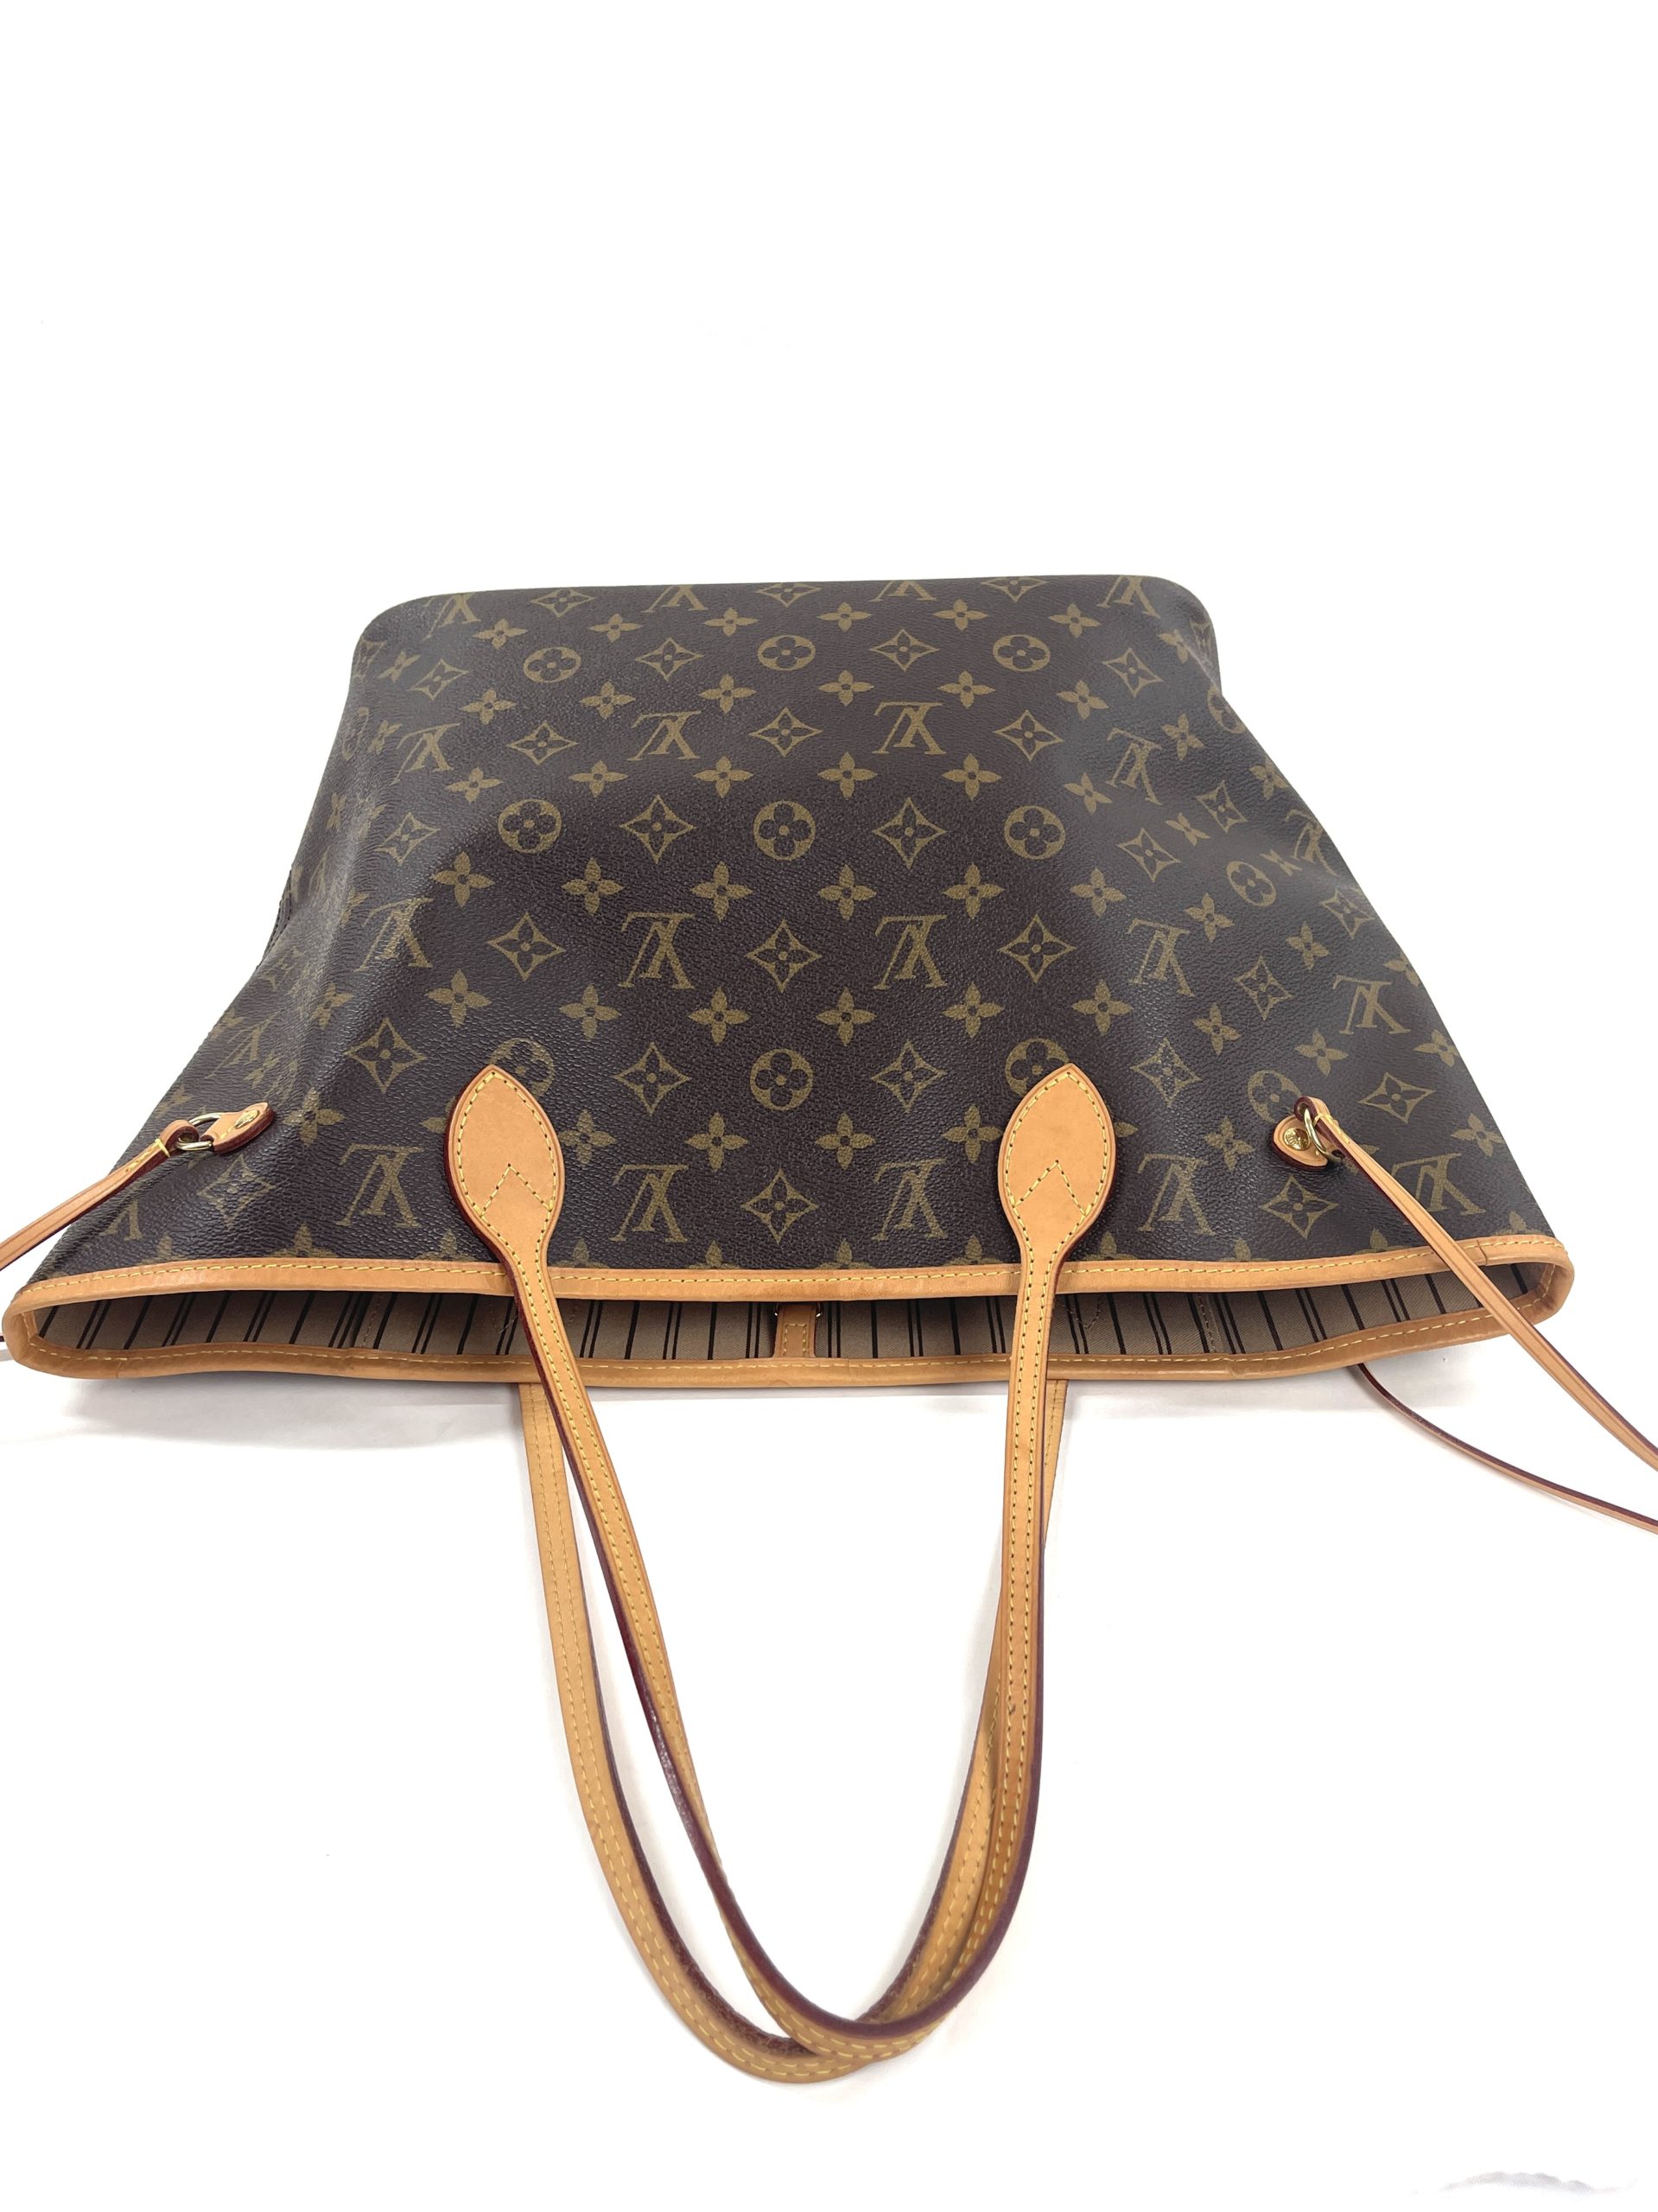 Louis Vuitton Monogram Neverfull MM Used condition 7/10 Selling at